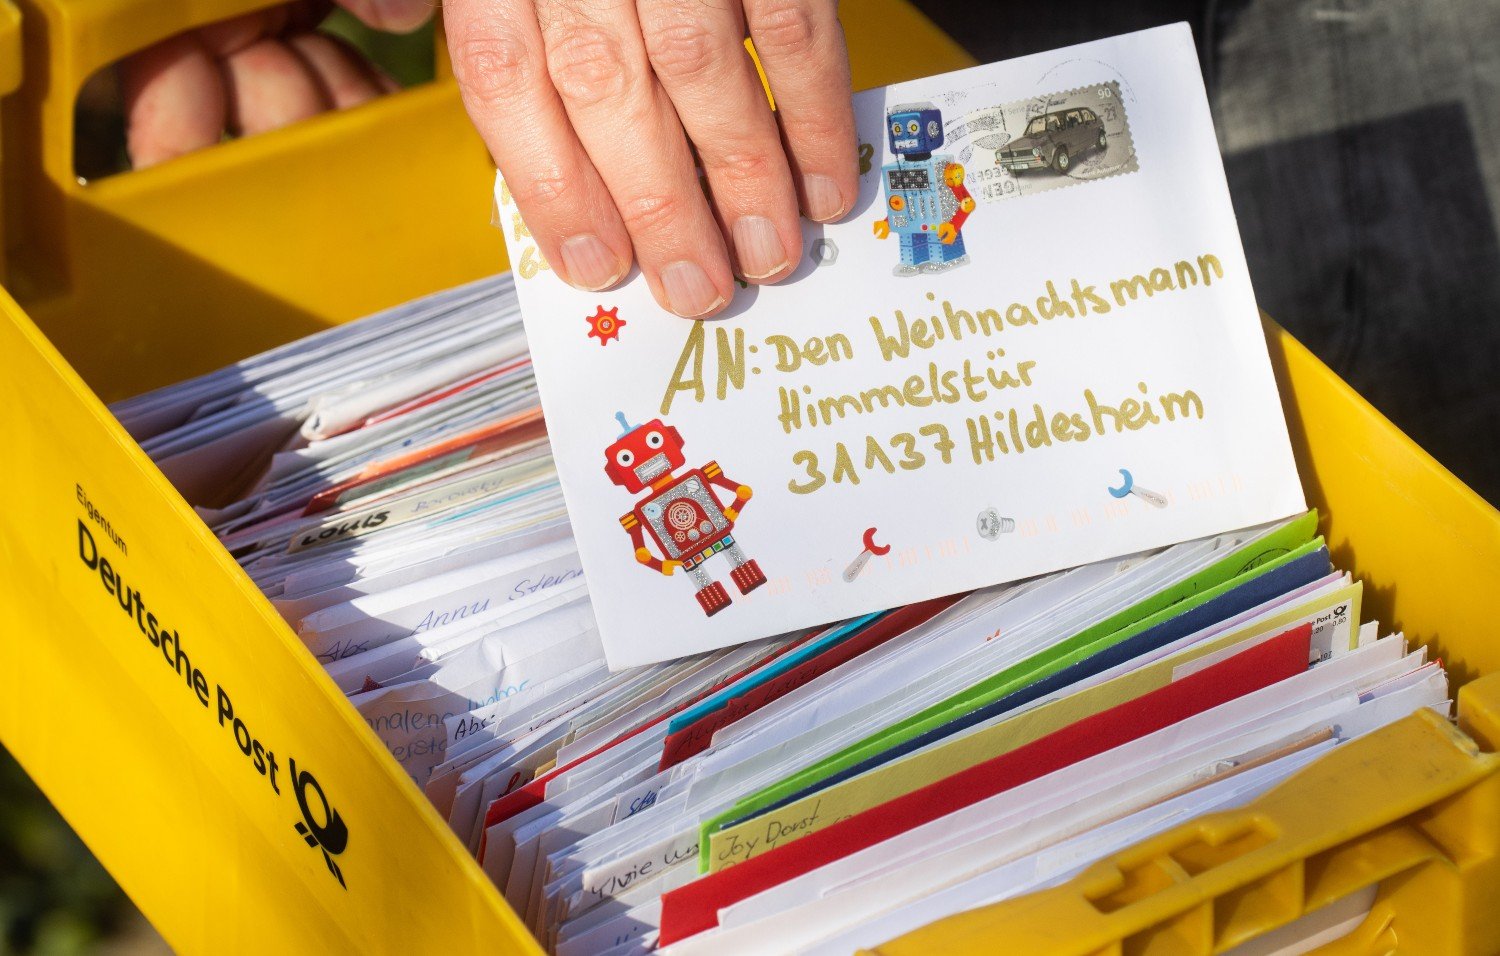 An employee from the Hildesheim Himmelsthür Christmas post office shows letters to Santa Claus.